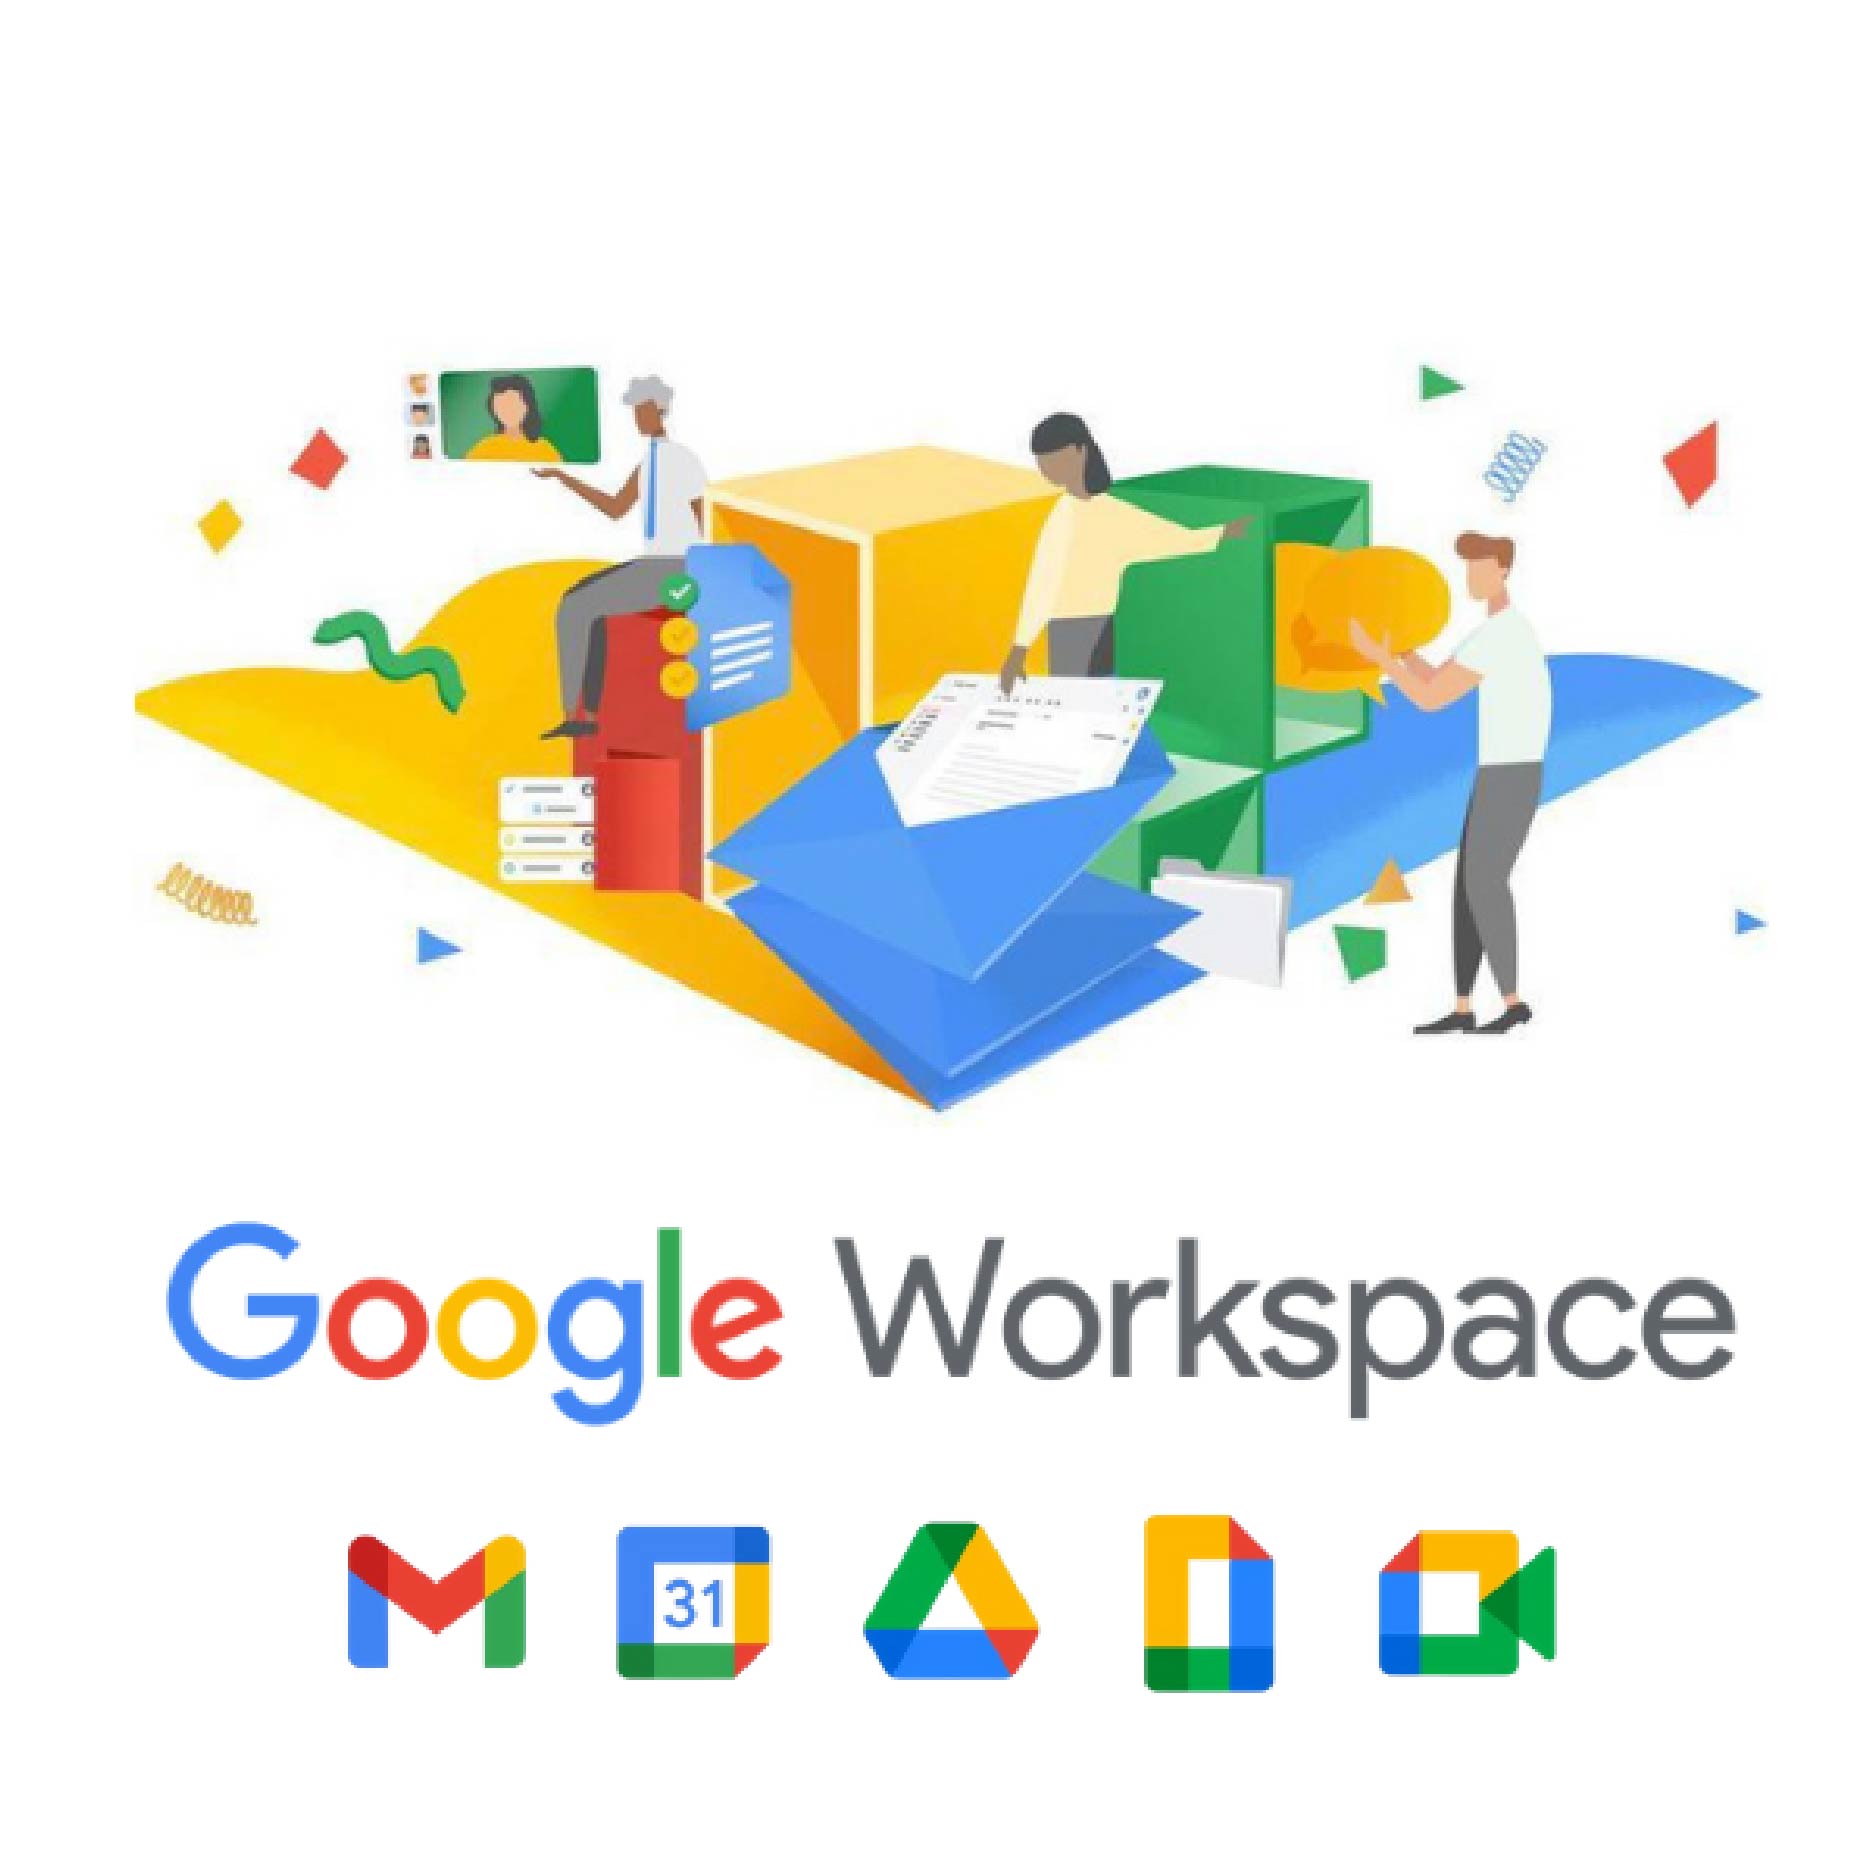 Google Workspace (Fundamentals Training from Basic to Advance)